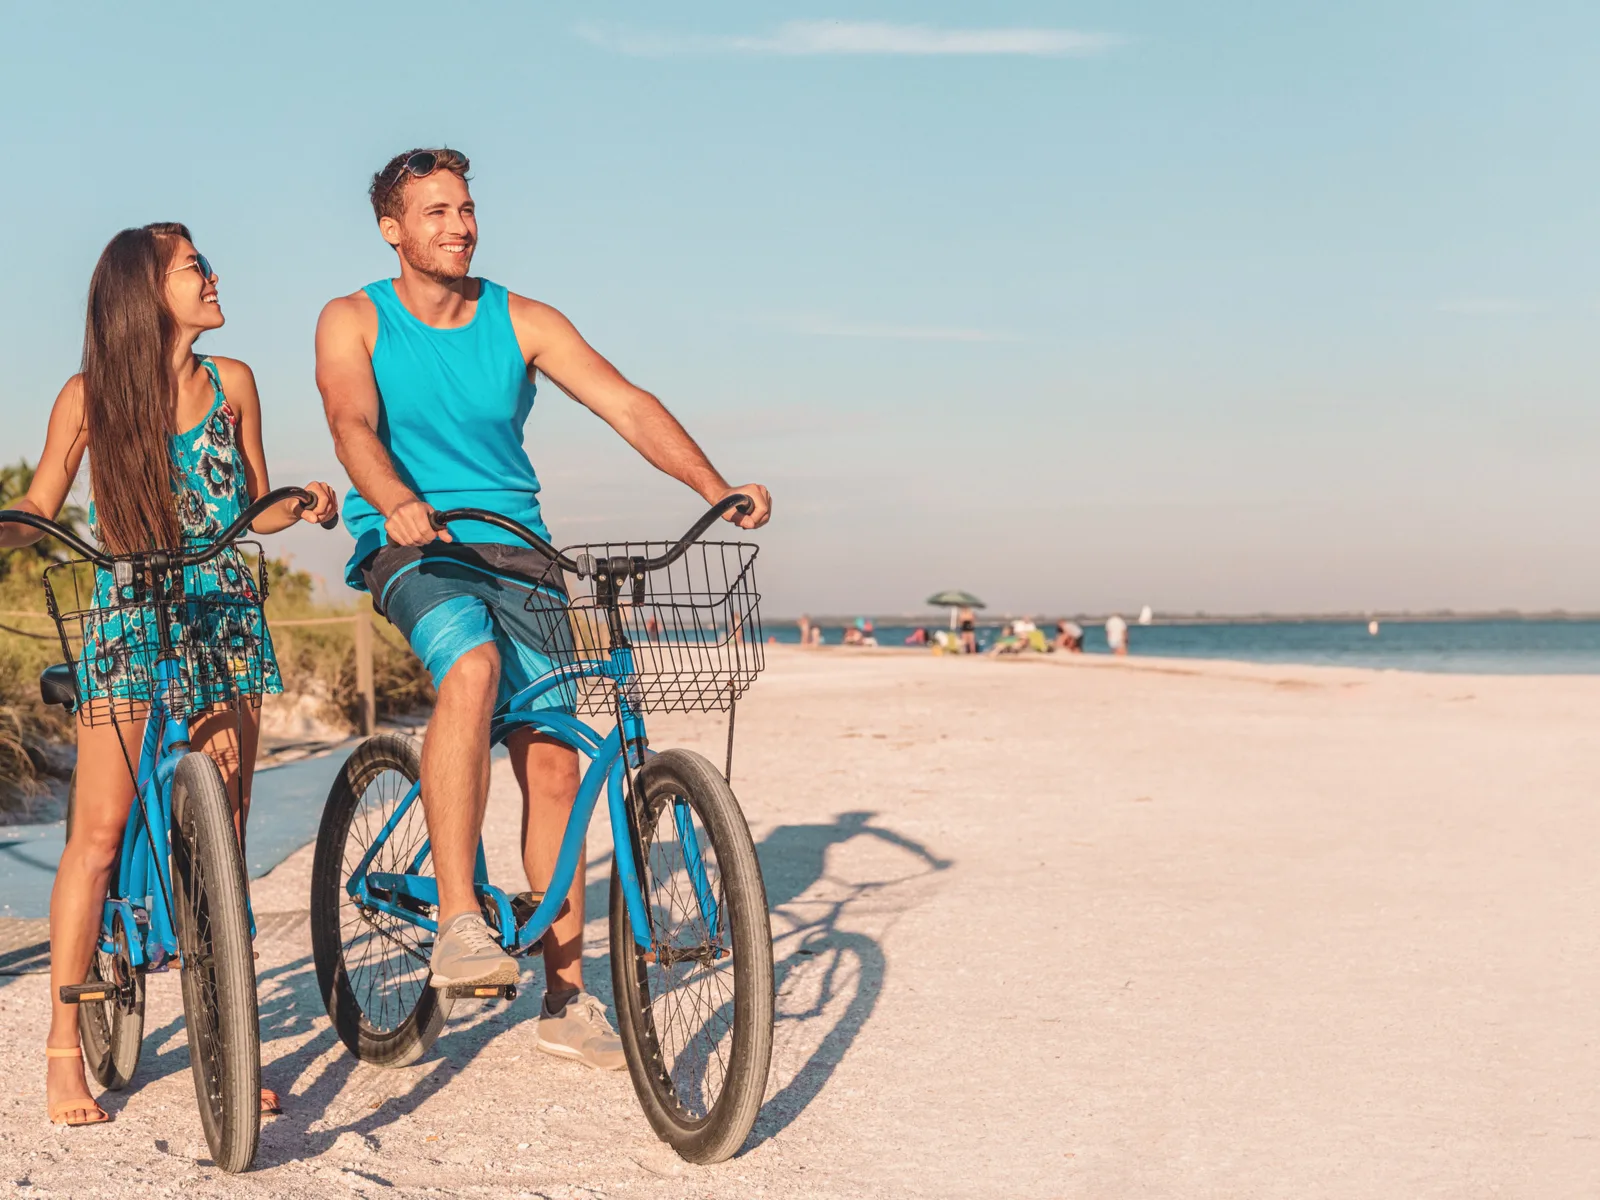 A smiling couple riding a bicycle at one of the best beaches on the East Coast